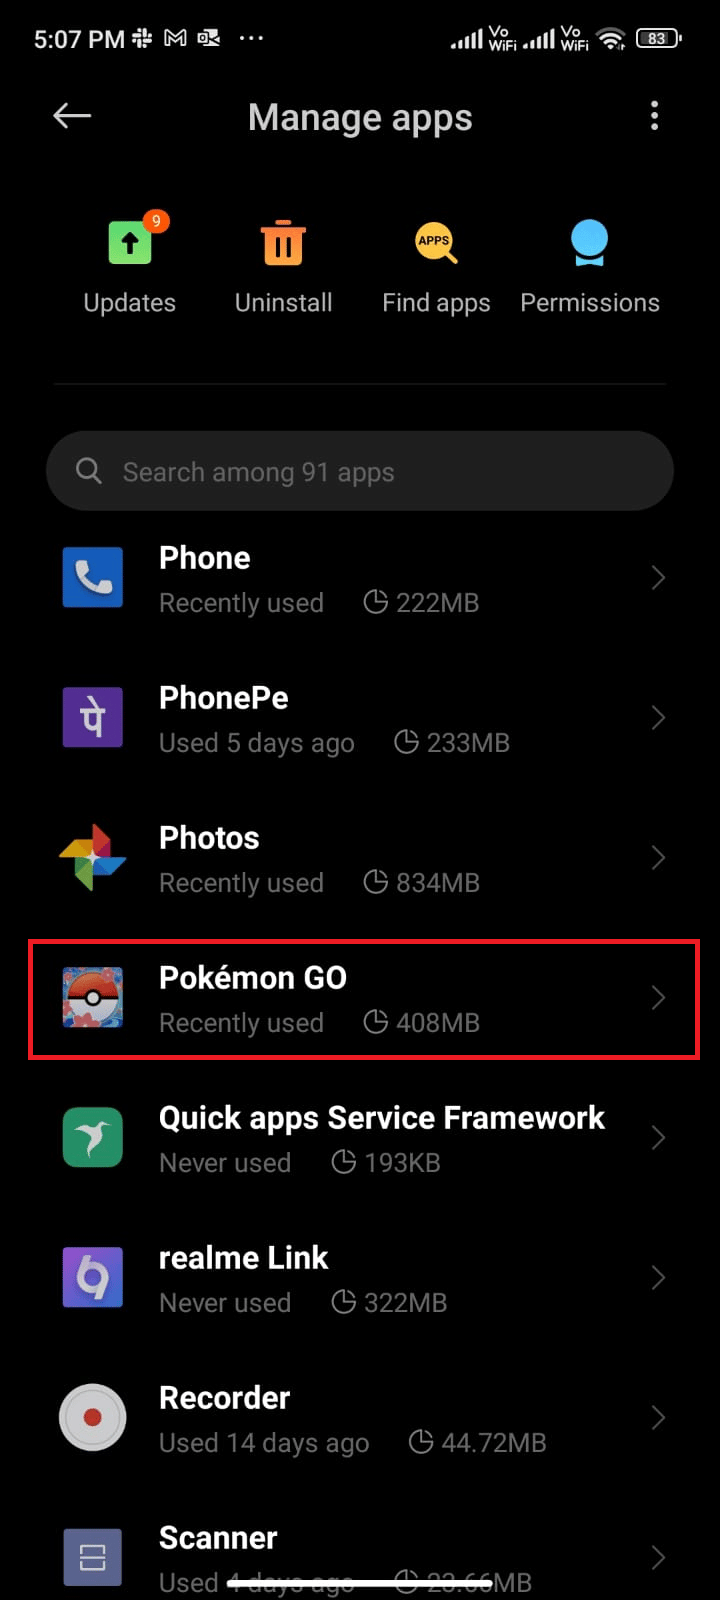 tap on Manage apps and then tap Pokémon GO 